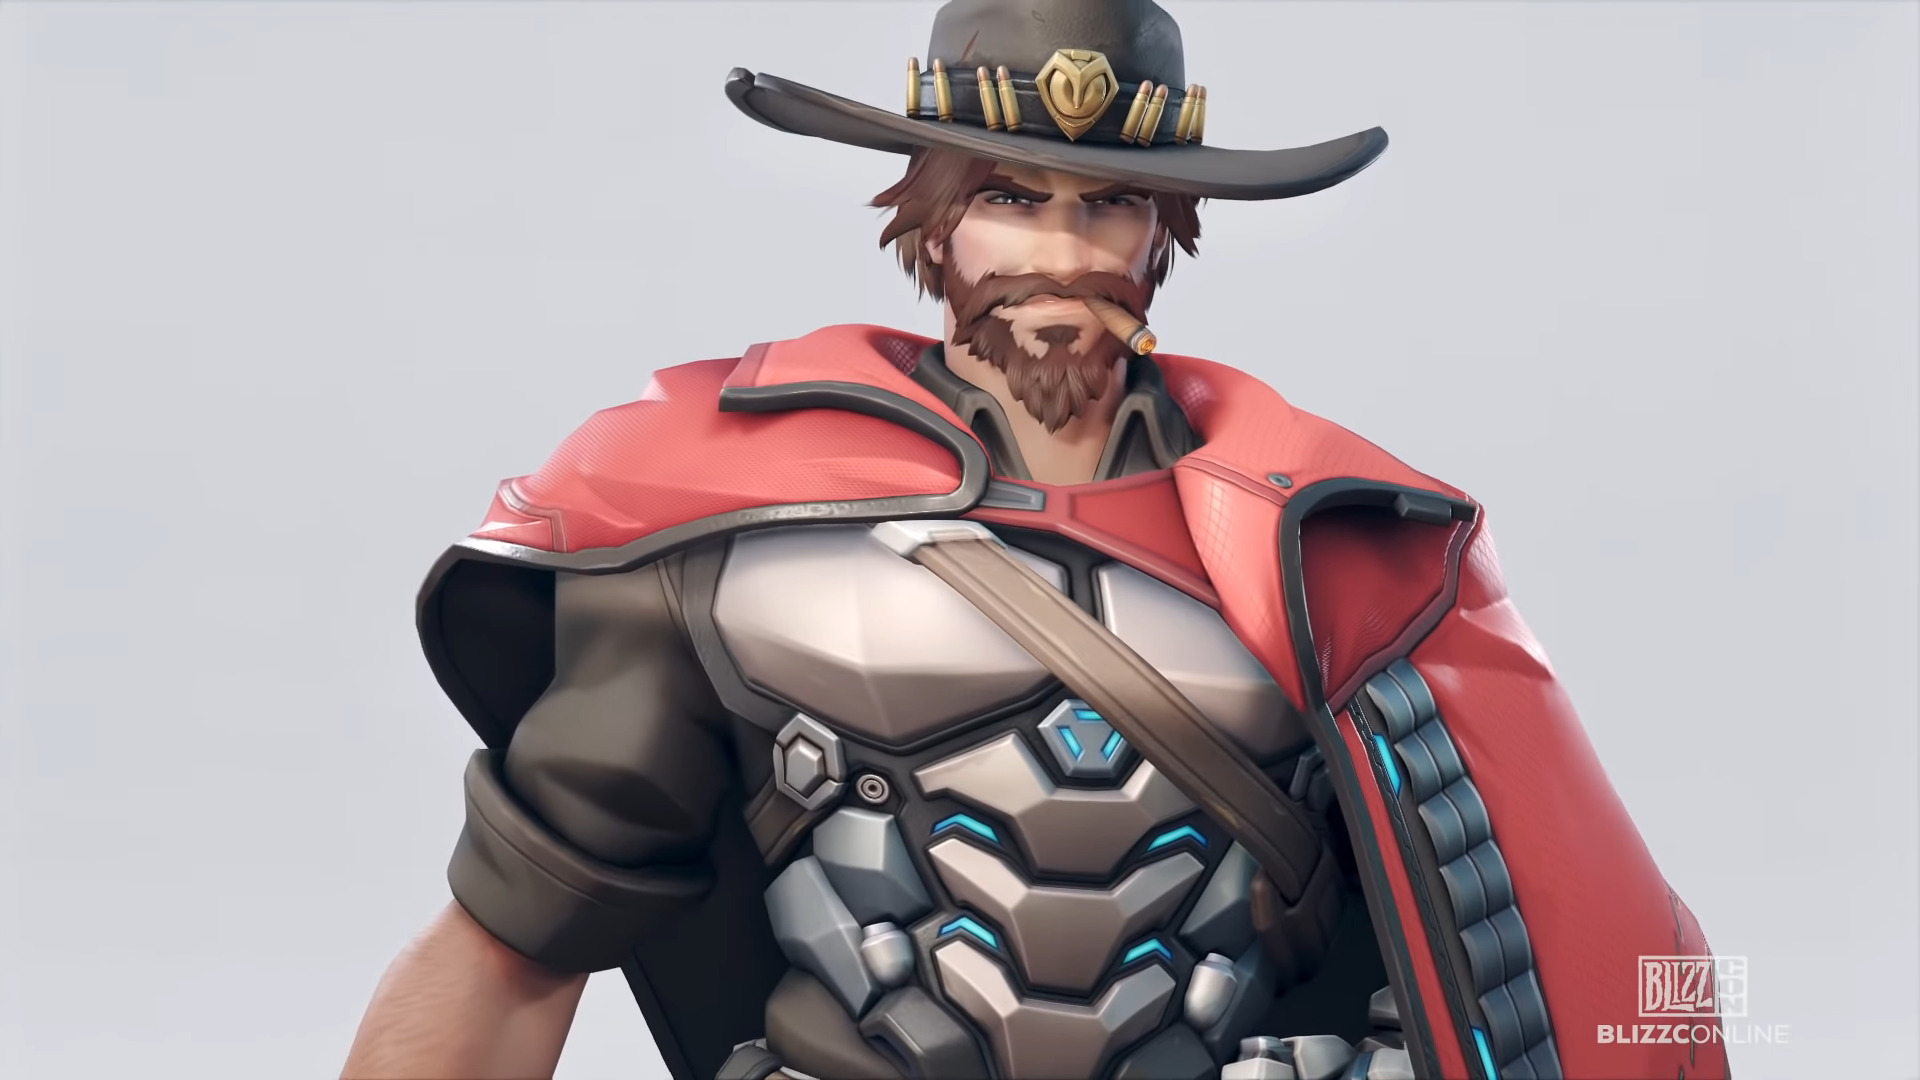 Overwatch says goodbye to Jesse McCree, but hello to Cole Cassidy

